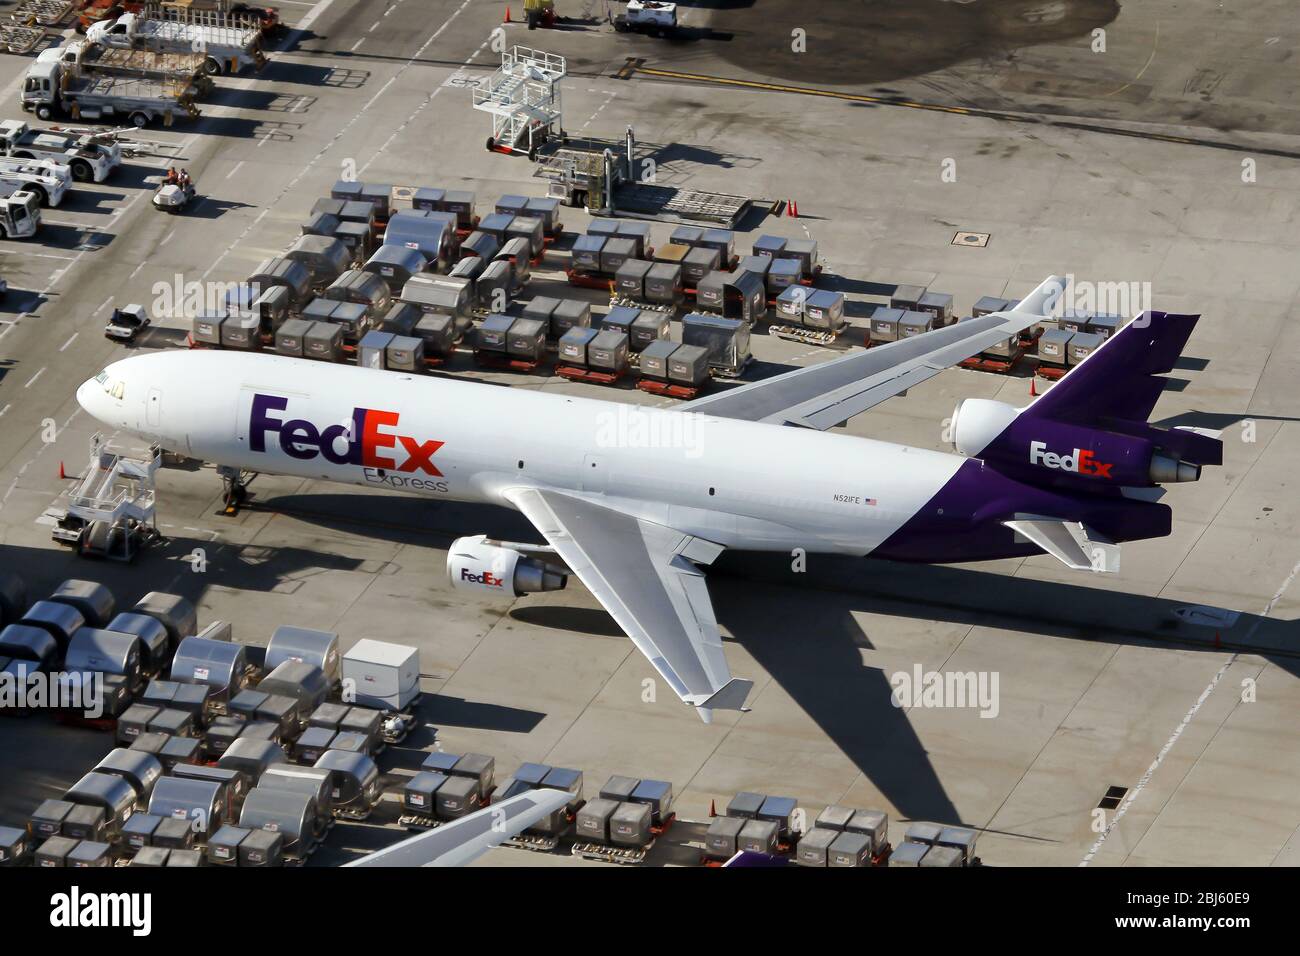 Los Angeles, USA. 31st Aug, 2015. A FedEx McDonnell Douglas MD-11F being uploaded at the Cargo area of Los Angeles Int'l airport. Credit: Fabrizio Gandolfo/SOPA Images/ZUMA Wire/Alamy Live News Stock Photo